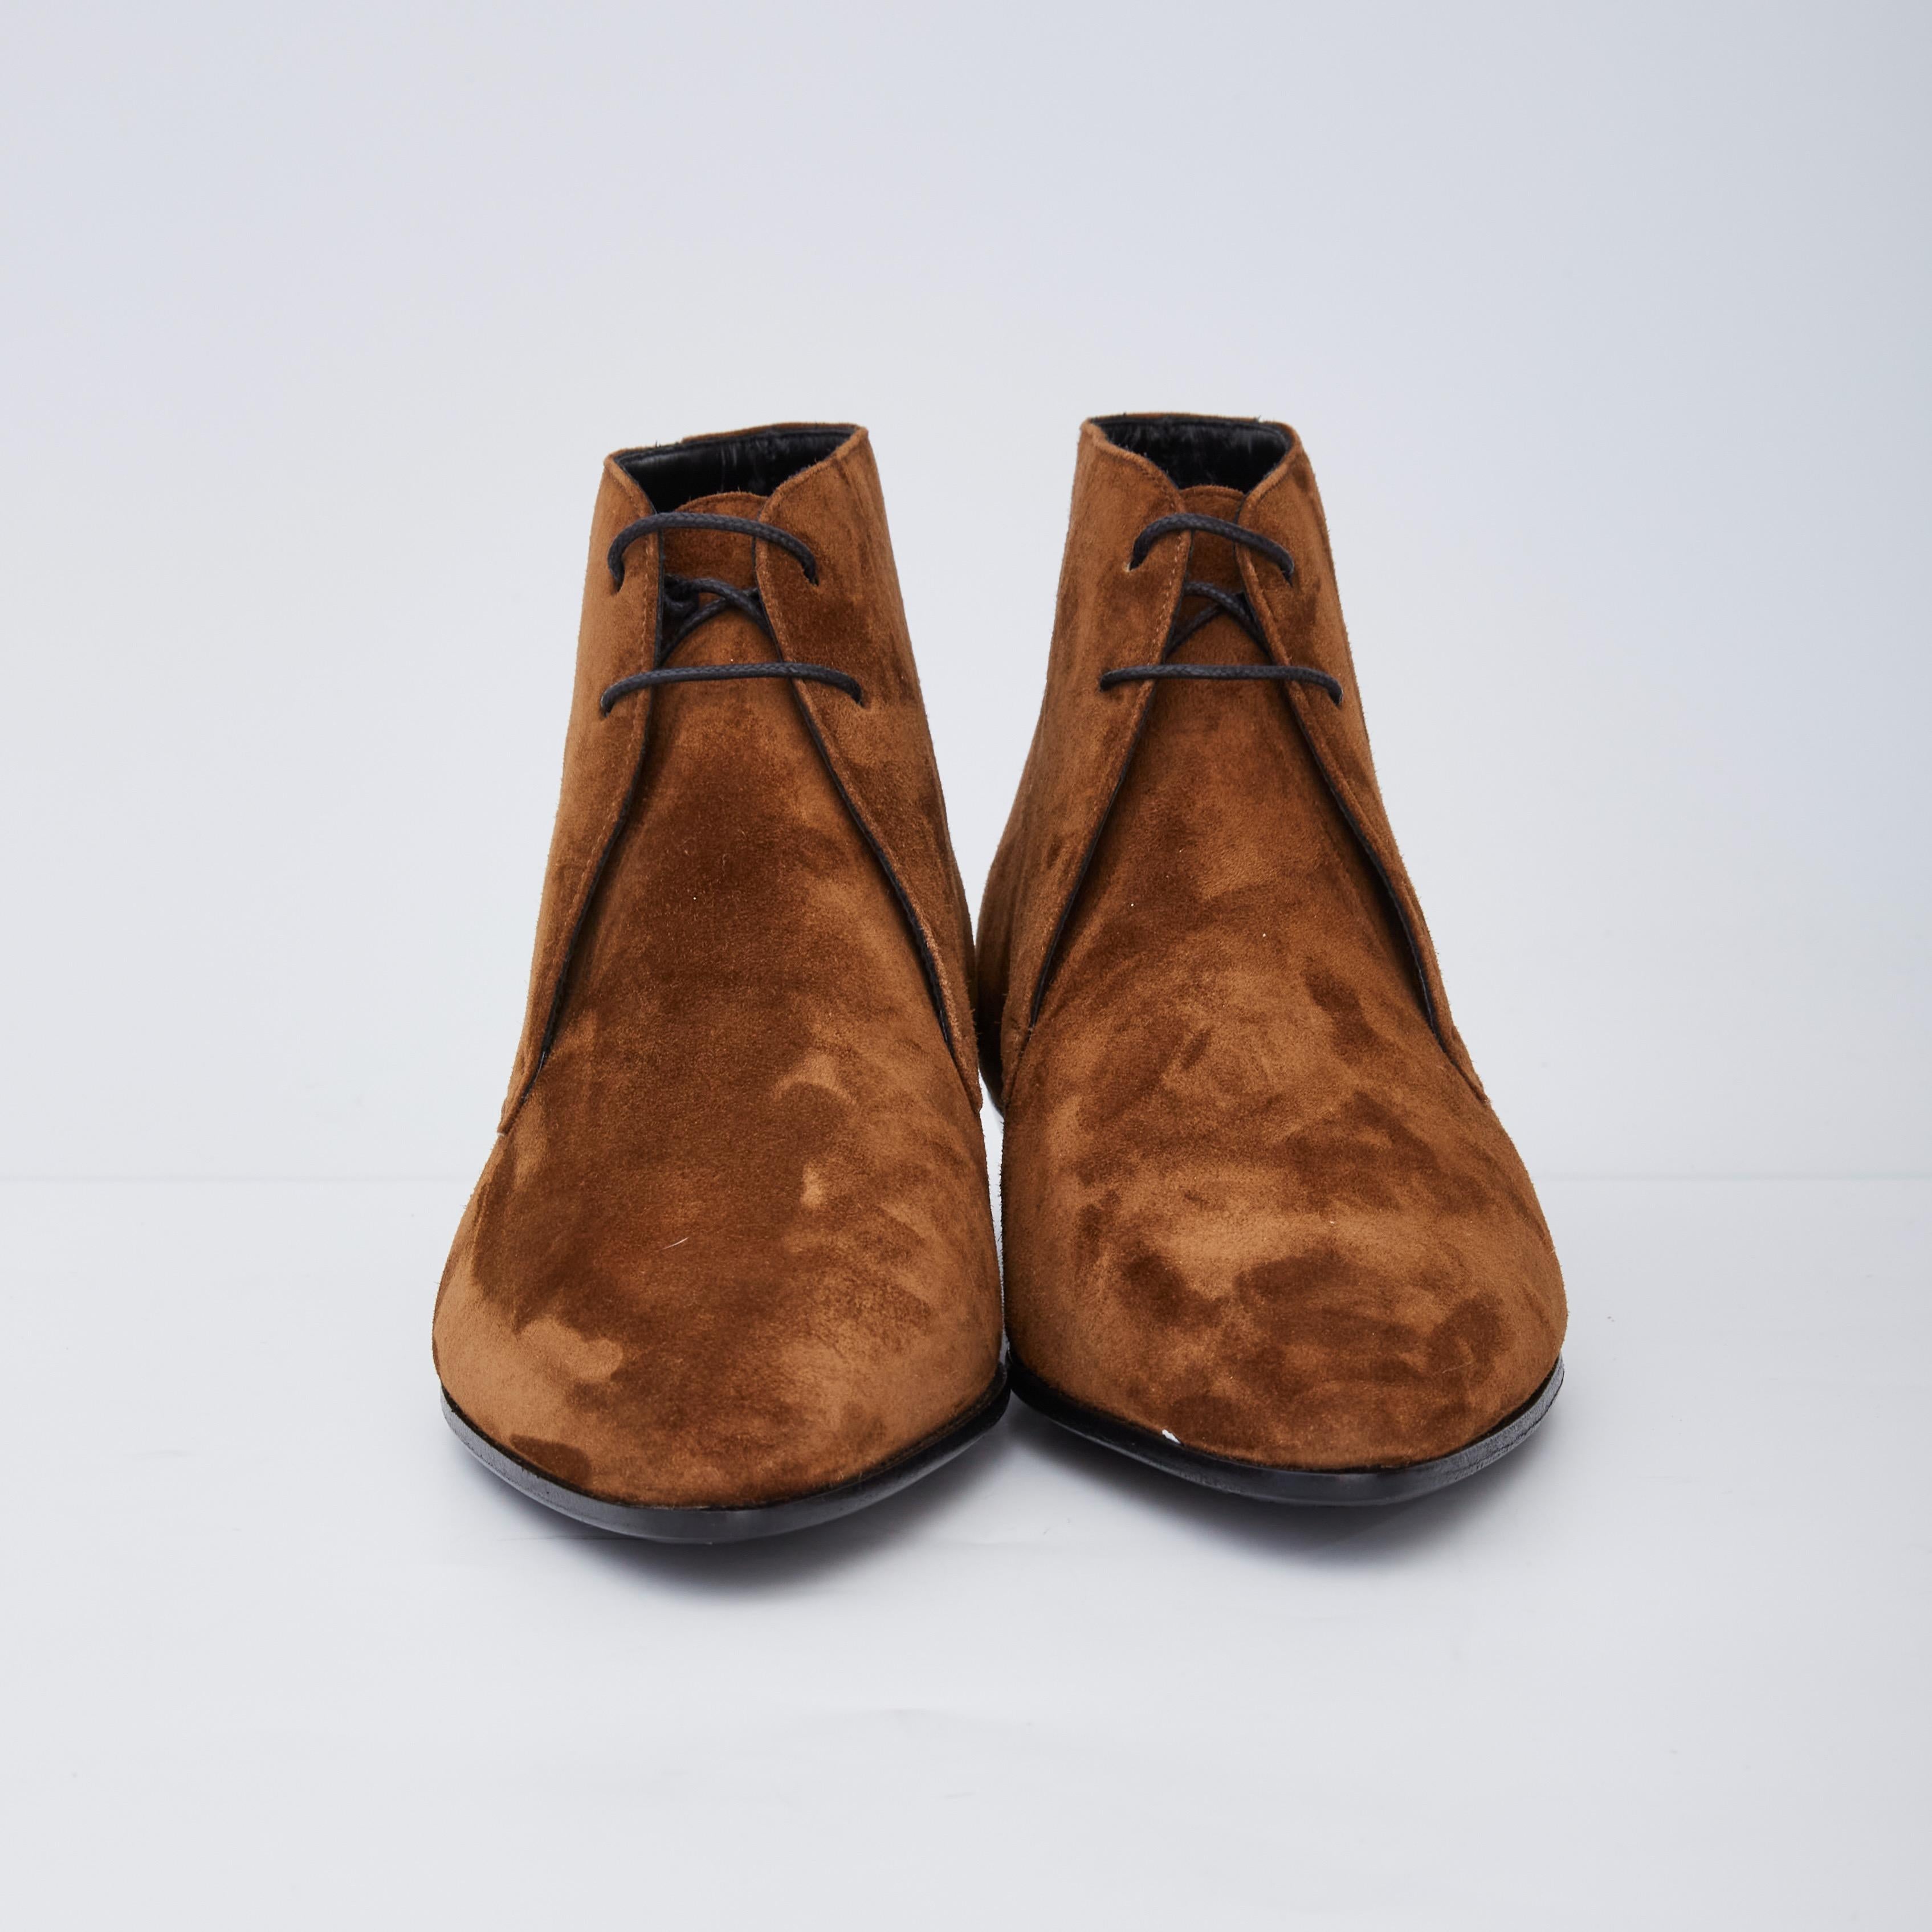 Women’s brown/cashmere ‘Jonas’ lace-up heeled ankle boots from Saint Laurent. Made of suede. They feature a leather sole with a rubber insert.

COLOR: Brown/cashmere
MATERIAL: Suede
ITEM CODE: 581845
SIZE: 37.5 EU / 6.5 US
HEEL HEIGHT: 25 mm /